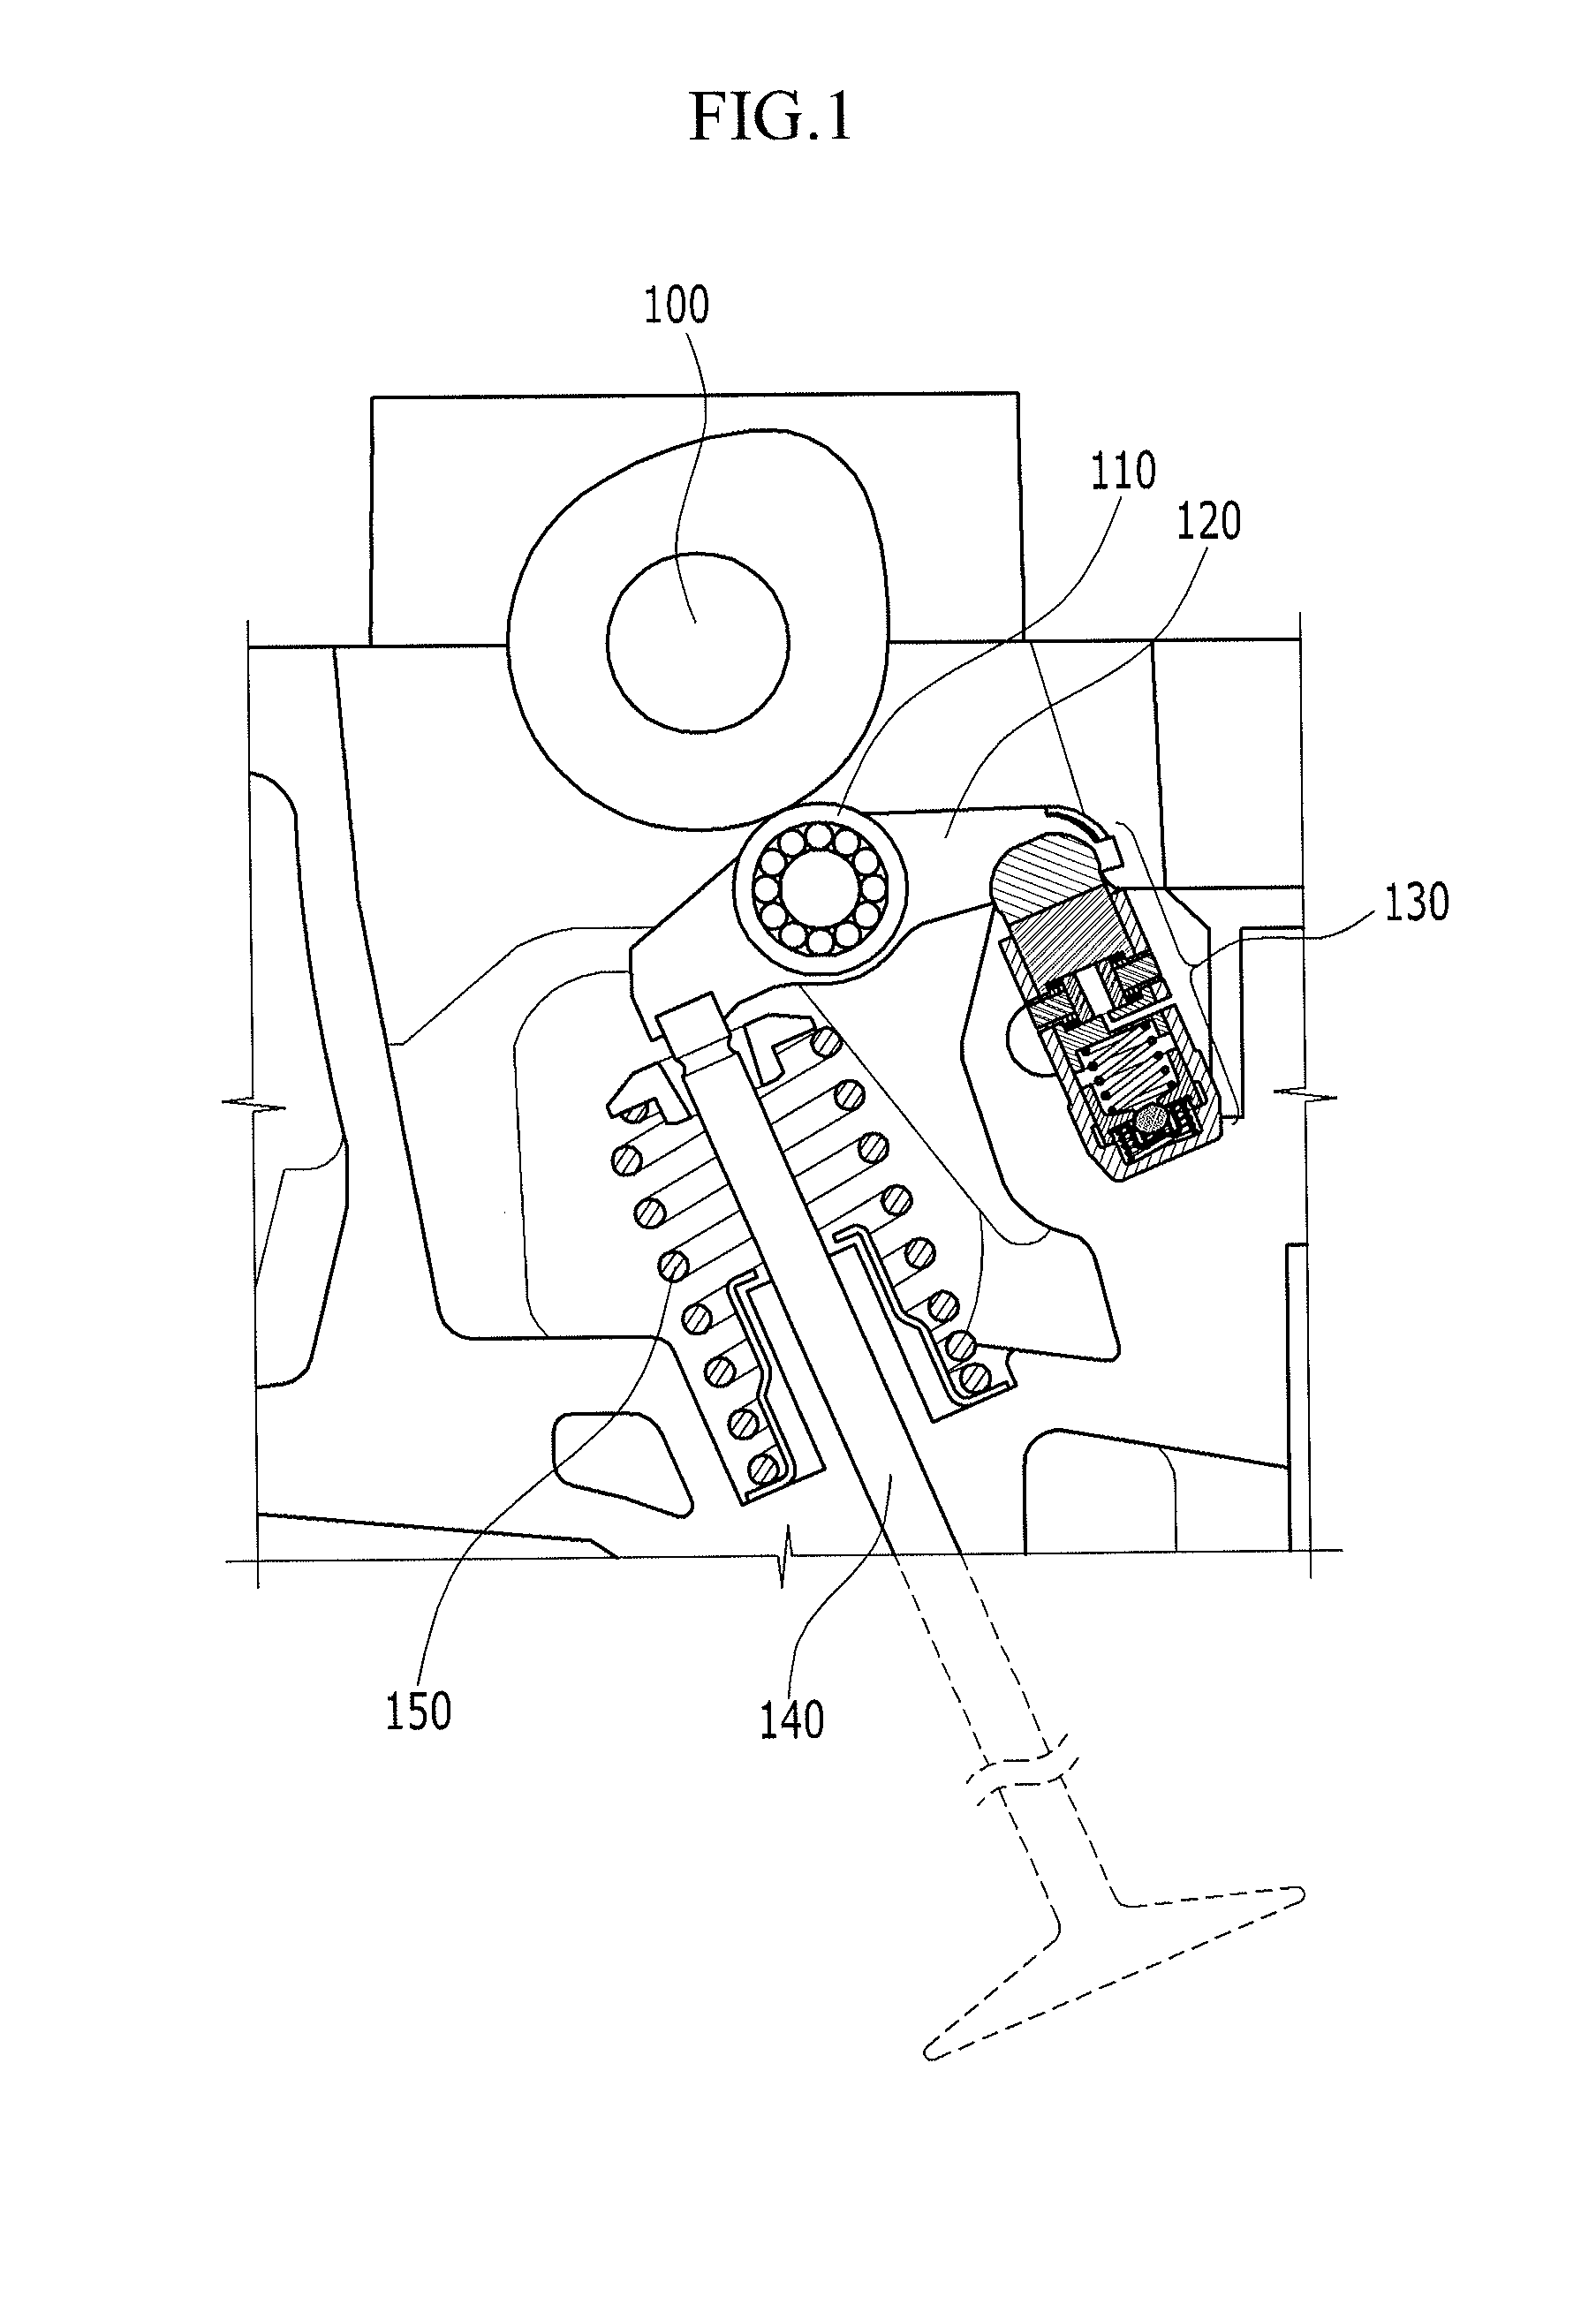 Engine that is equipped with variable valve device